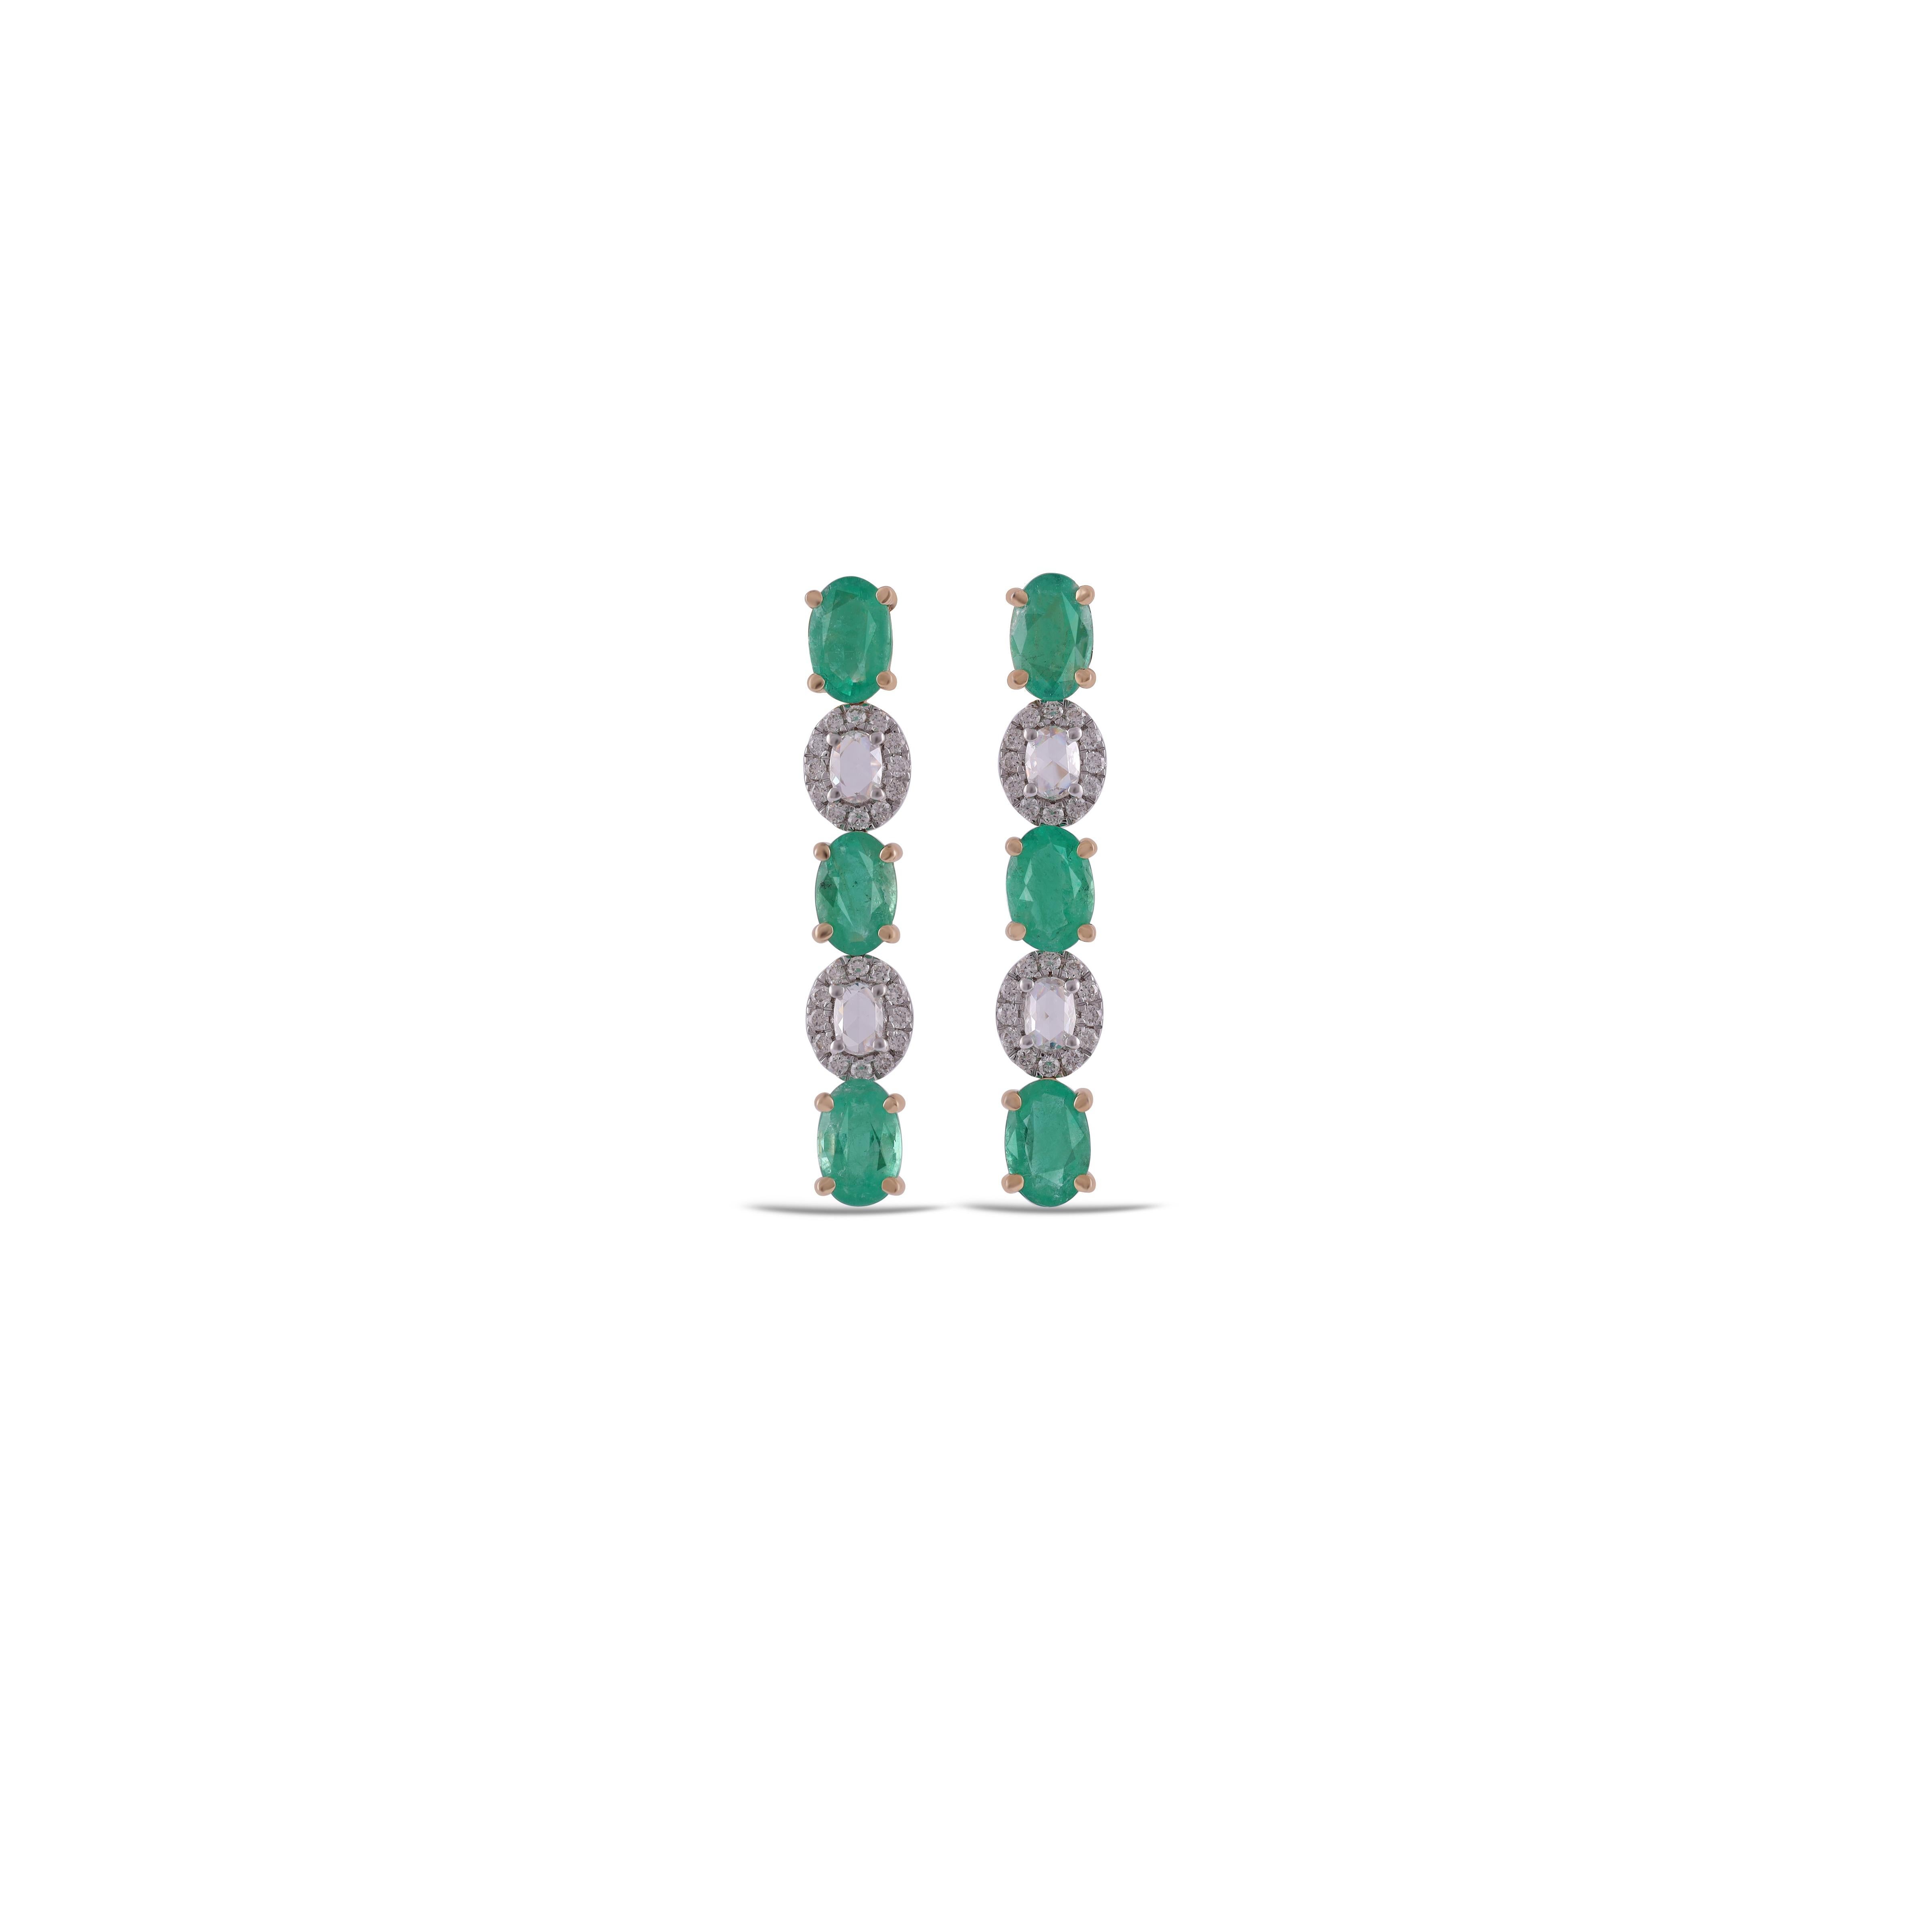 This is an elegant emerald & diamond Earring studded in 18k gold with 6 piece of  Zambian emerald weight 2.65 carat With diamonds weight 0.49 carat, this entire Earring studded in 18k gold


 It's a classic wearable emerald-diamond Earring. 
